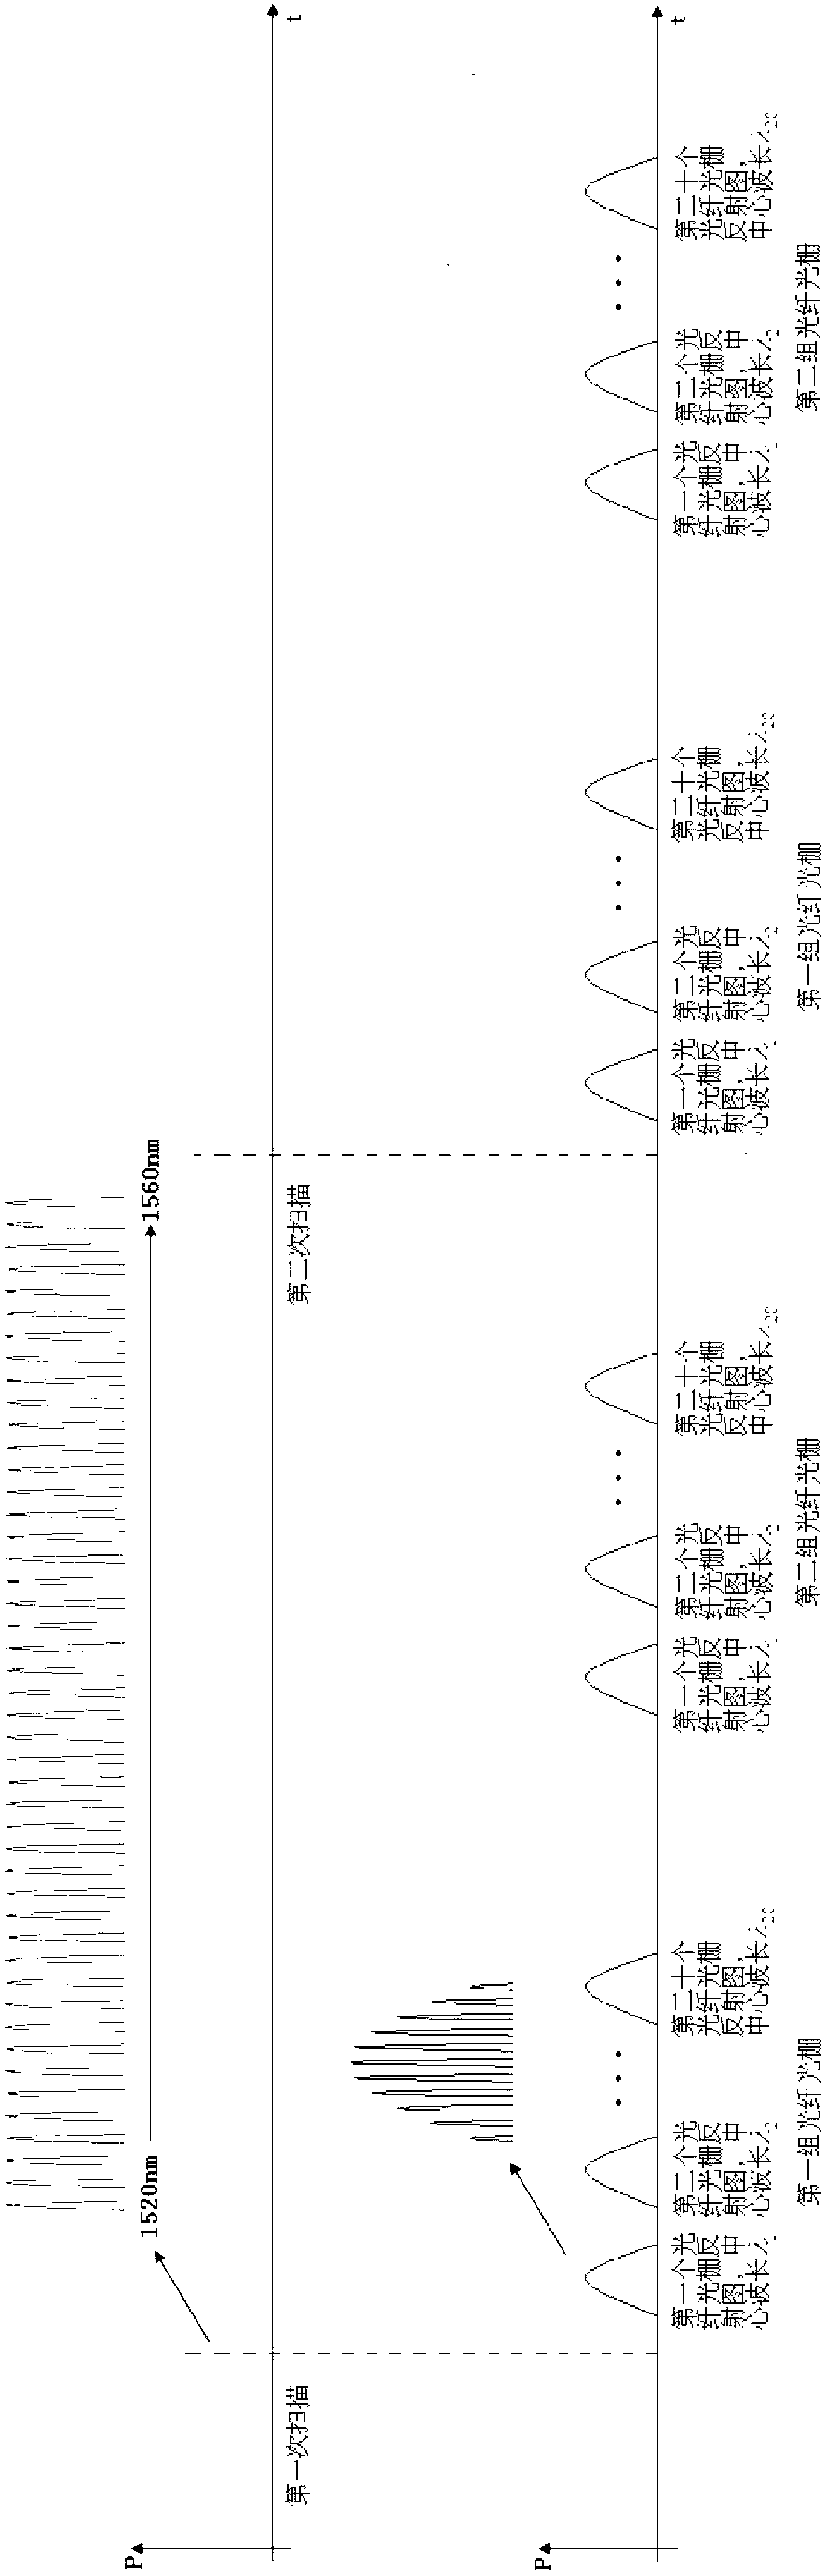 Real-time monitoring system and method based on optical time domain reflection and fiber grating distributed type